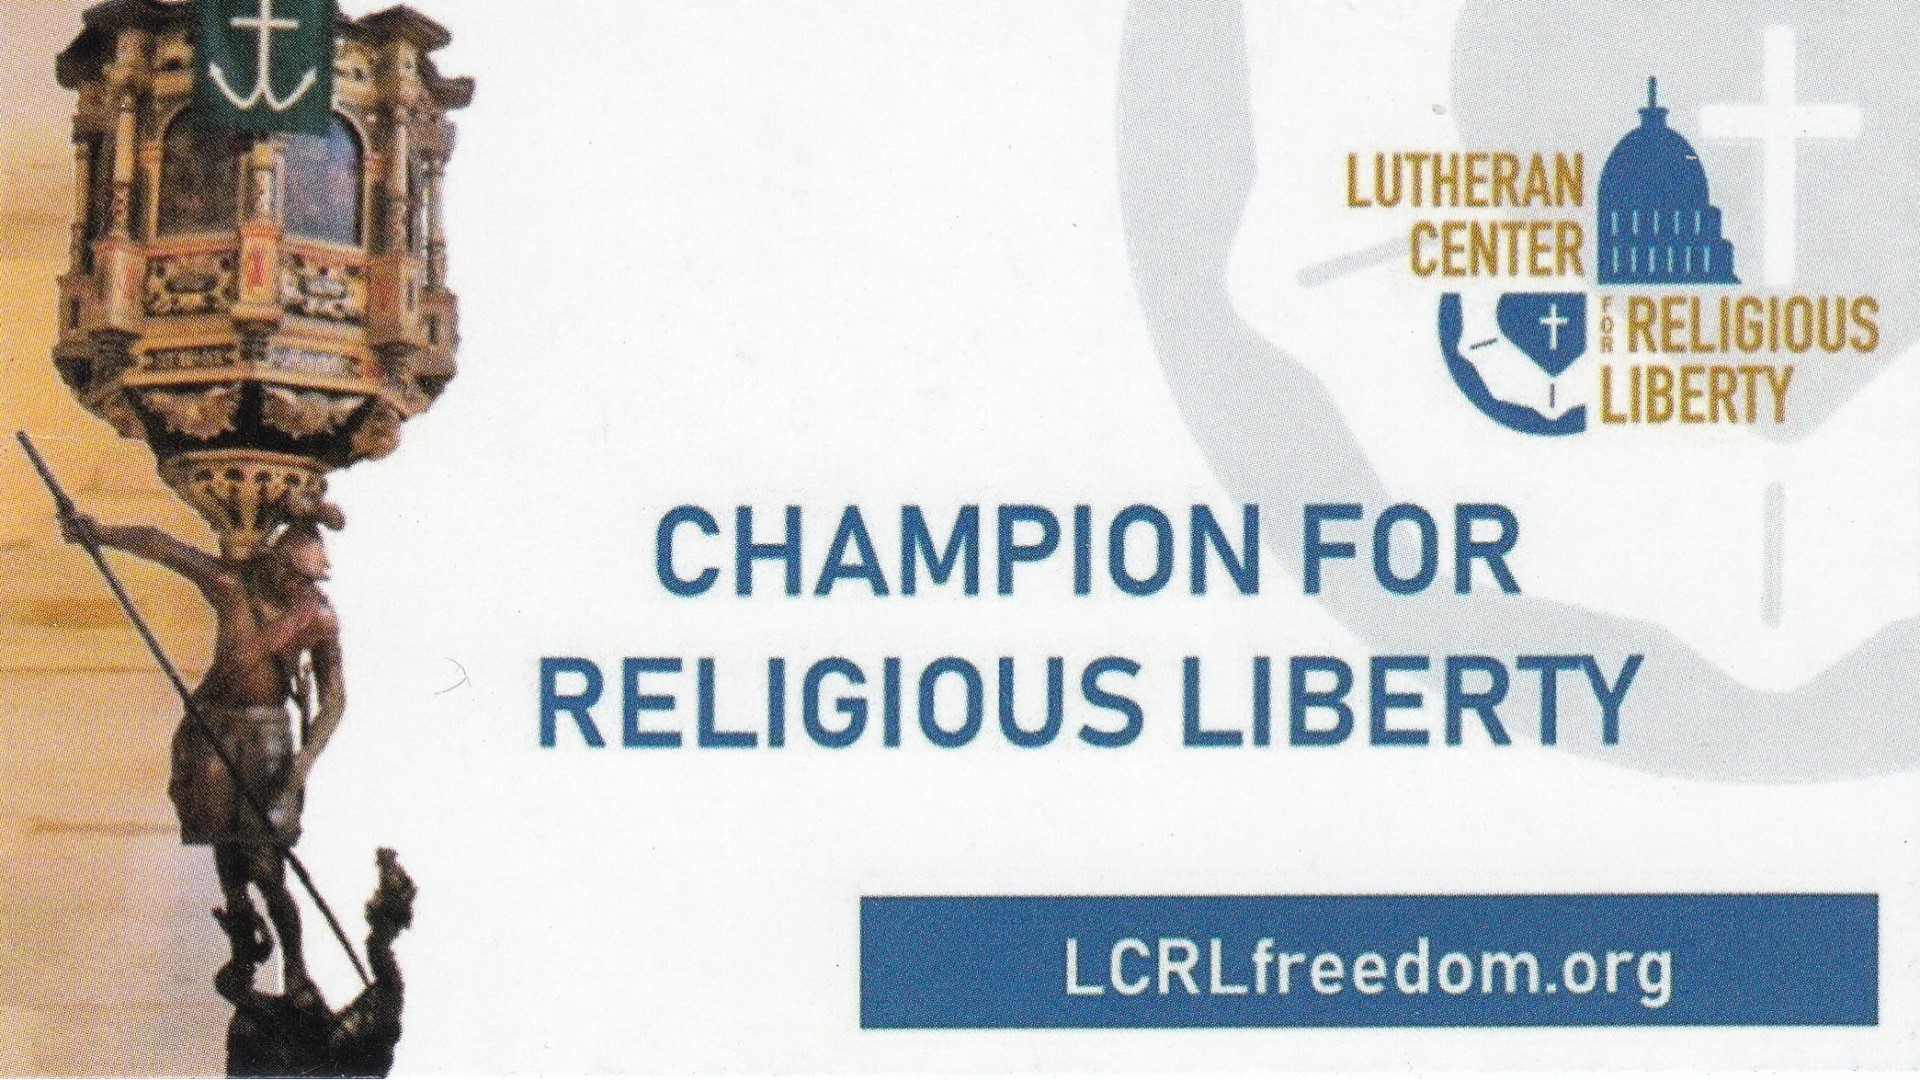 Champions for Religious Liberty Event